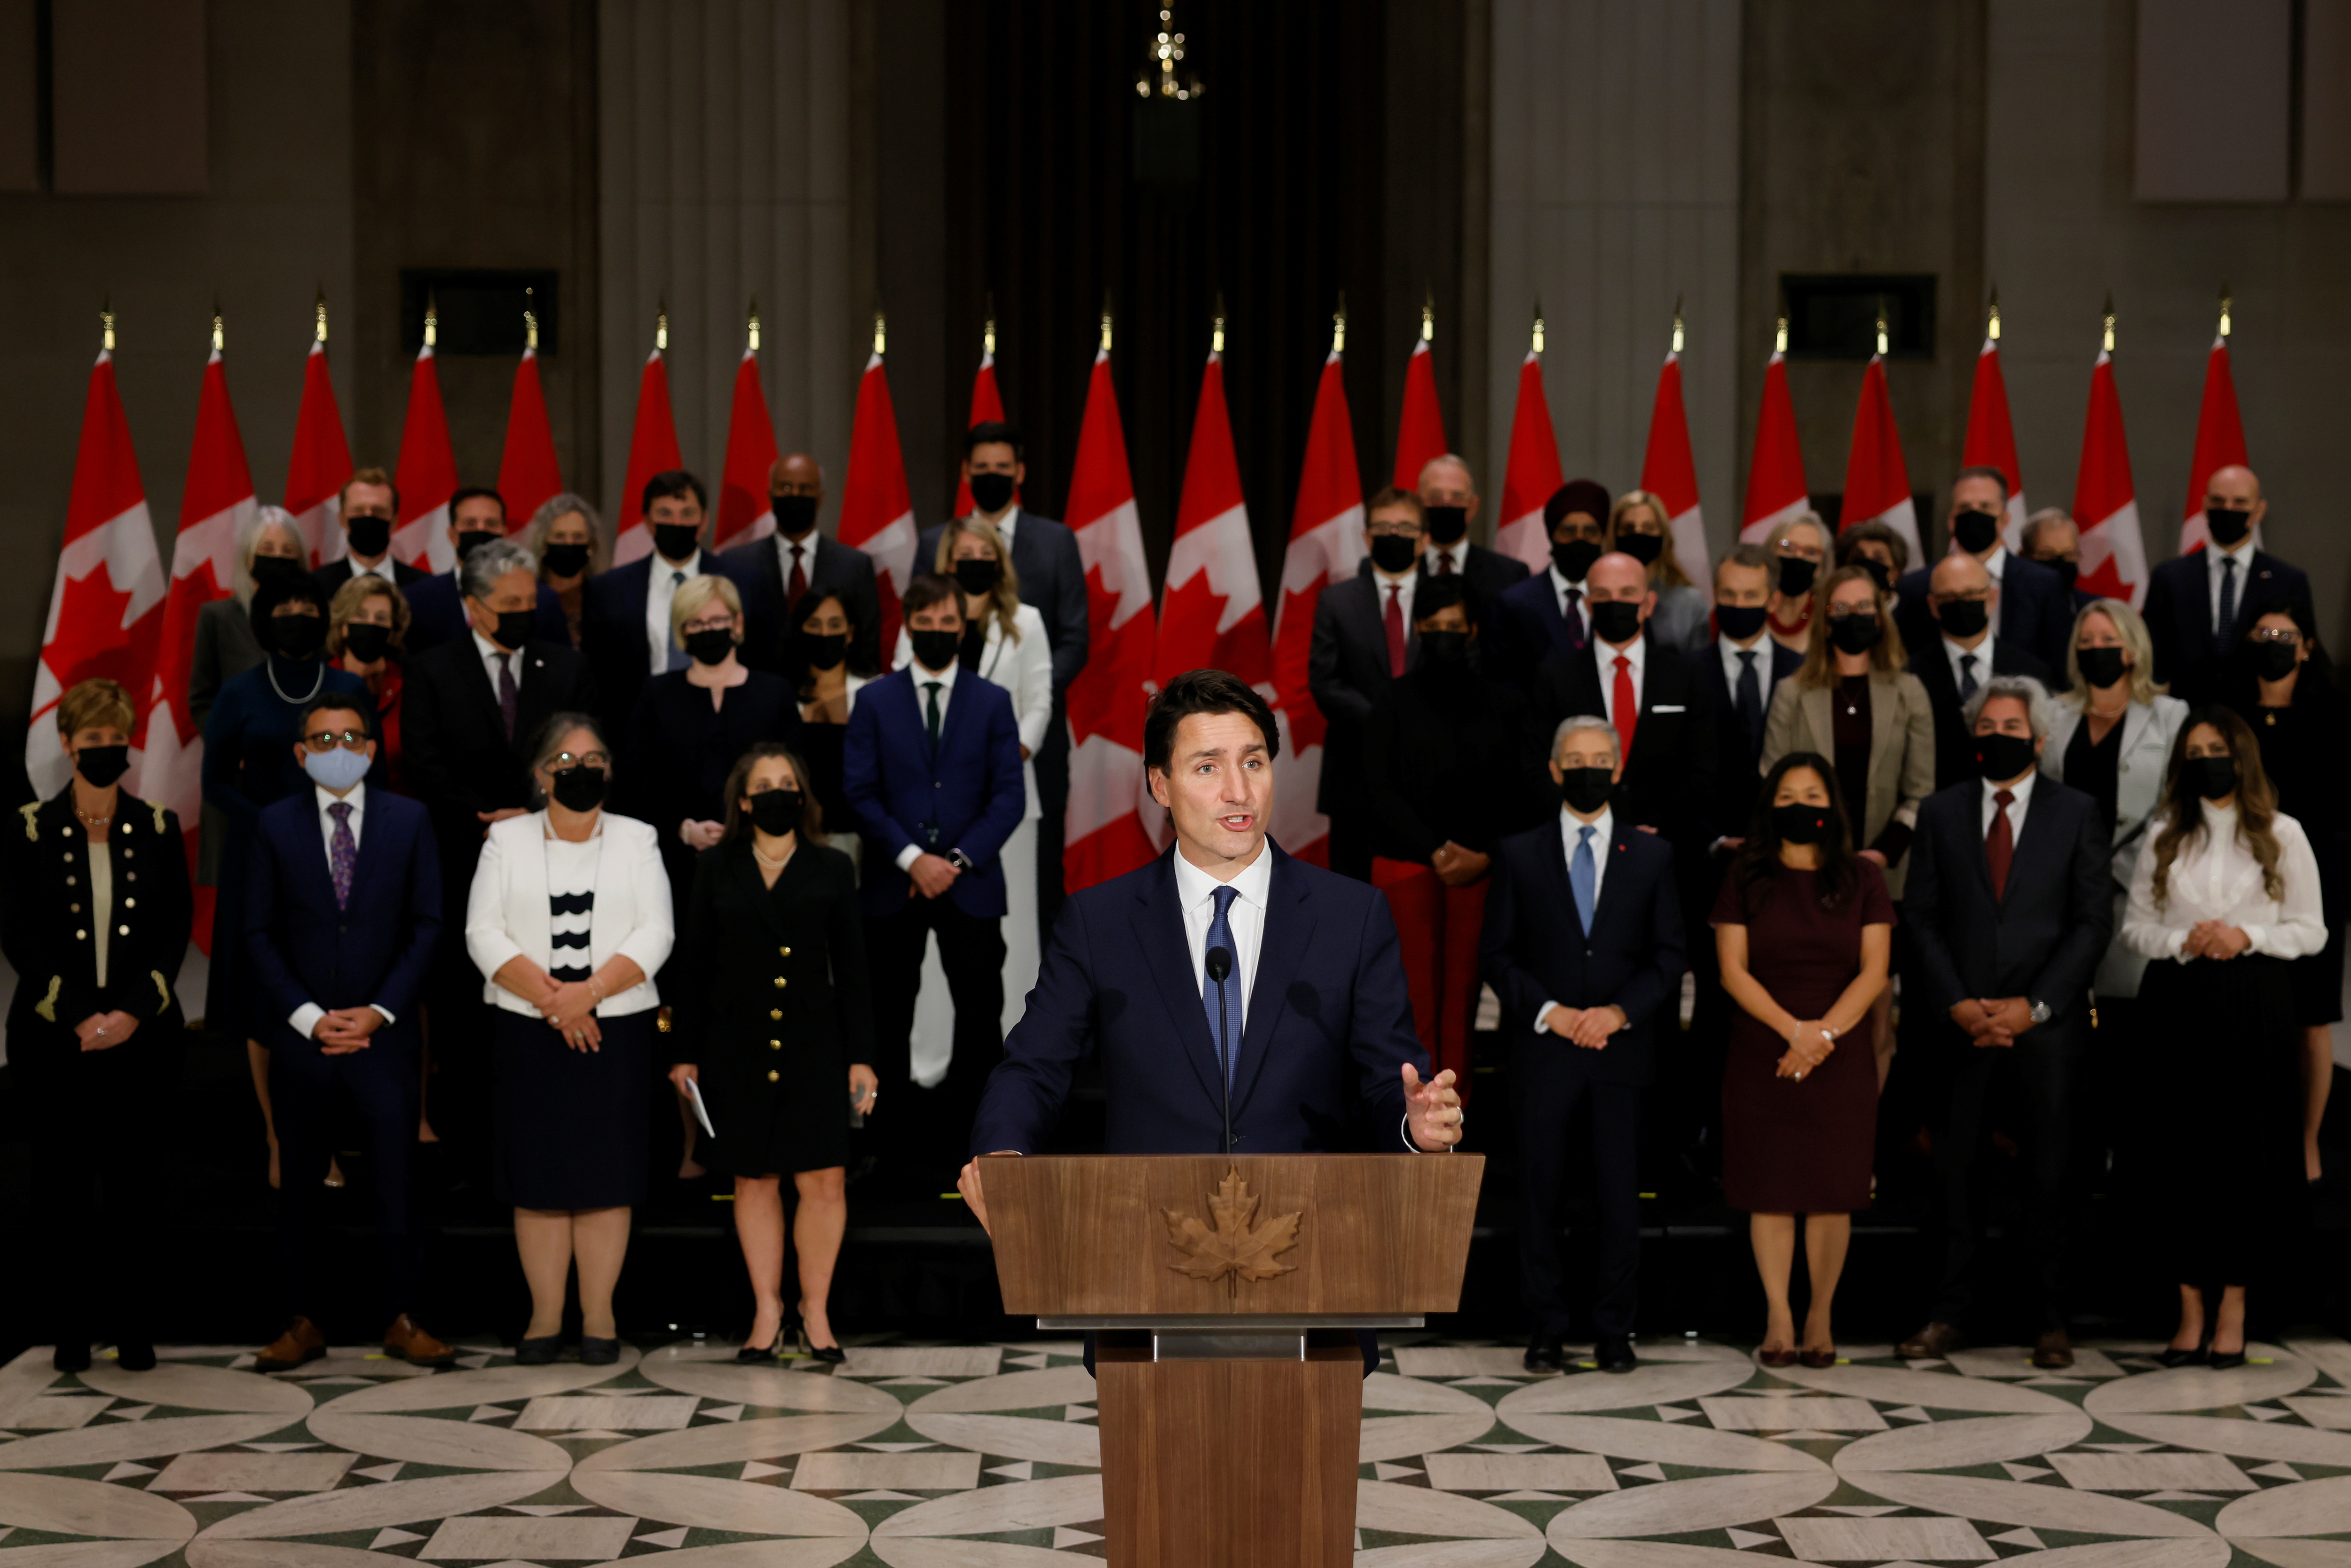 Canada's PM Trudeau attends a news conference after the swearing-in of a new Cabinet in Ottawa